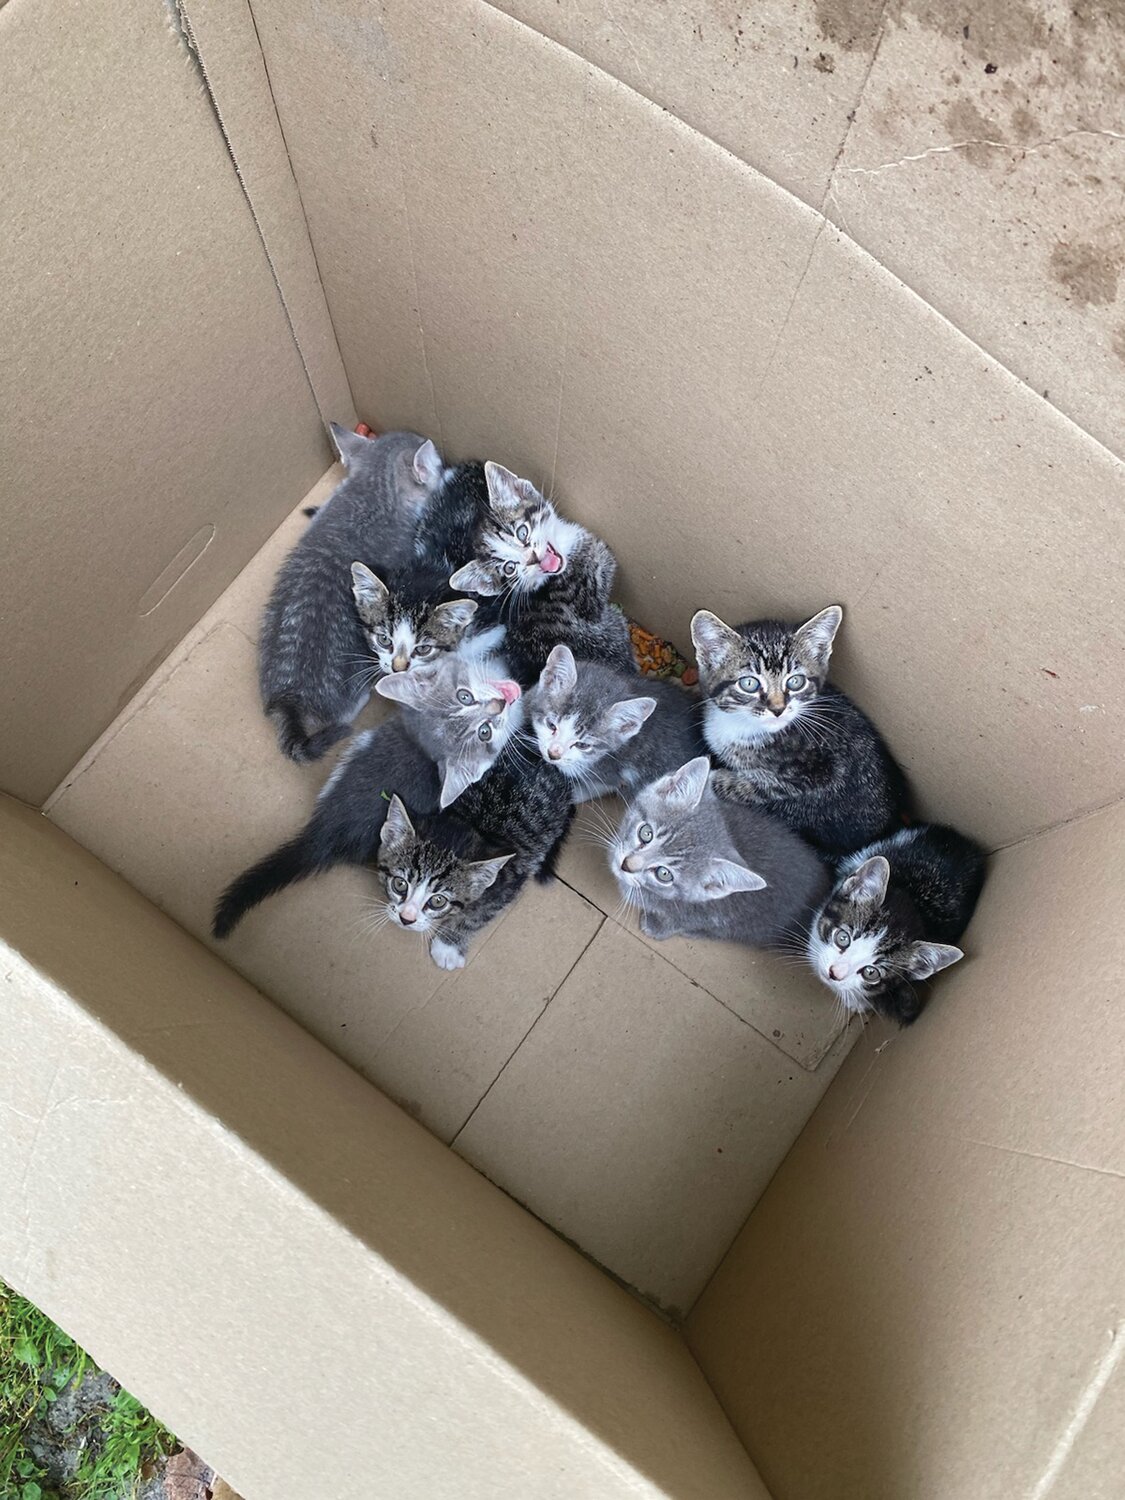 CAT-ASTROPHE AVOIDED: Warwick Parks and Recreation employee Paul Joutras found a box with nine kittens inside early Monday morning. He called police and the kittens were taken to the Warwick Animal Shelter. (Photo courtesy Paul Joutras)